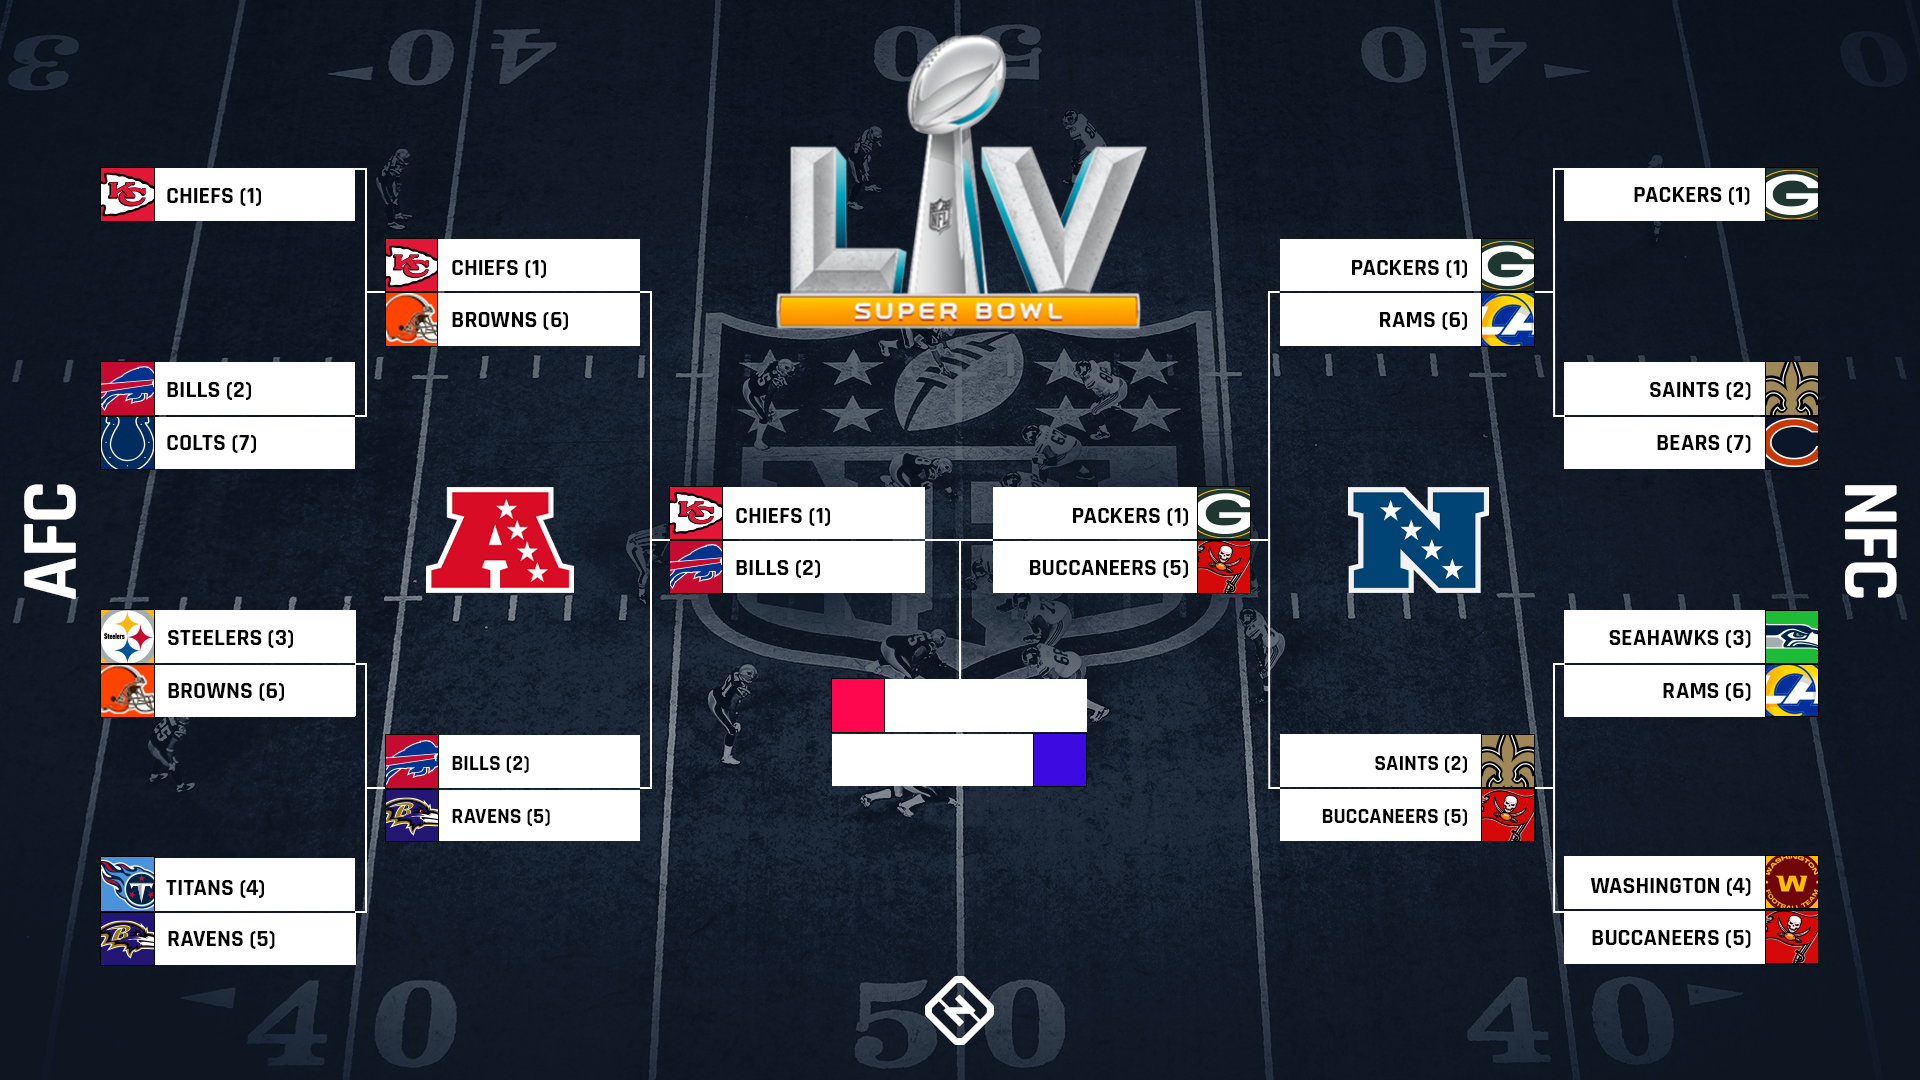 NFL playoff bracket 2021: Full schedule, TV channels, scores for AFC & NFC games